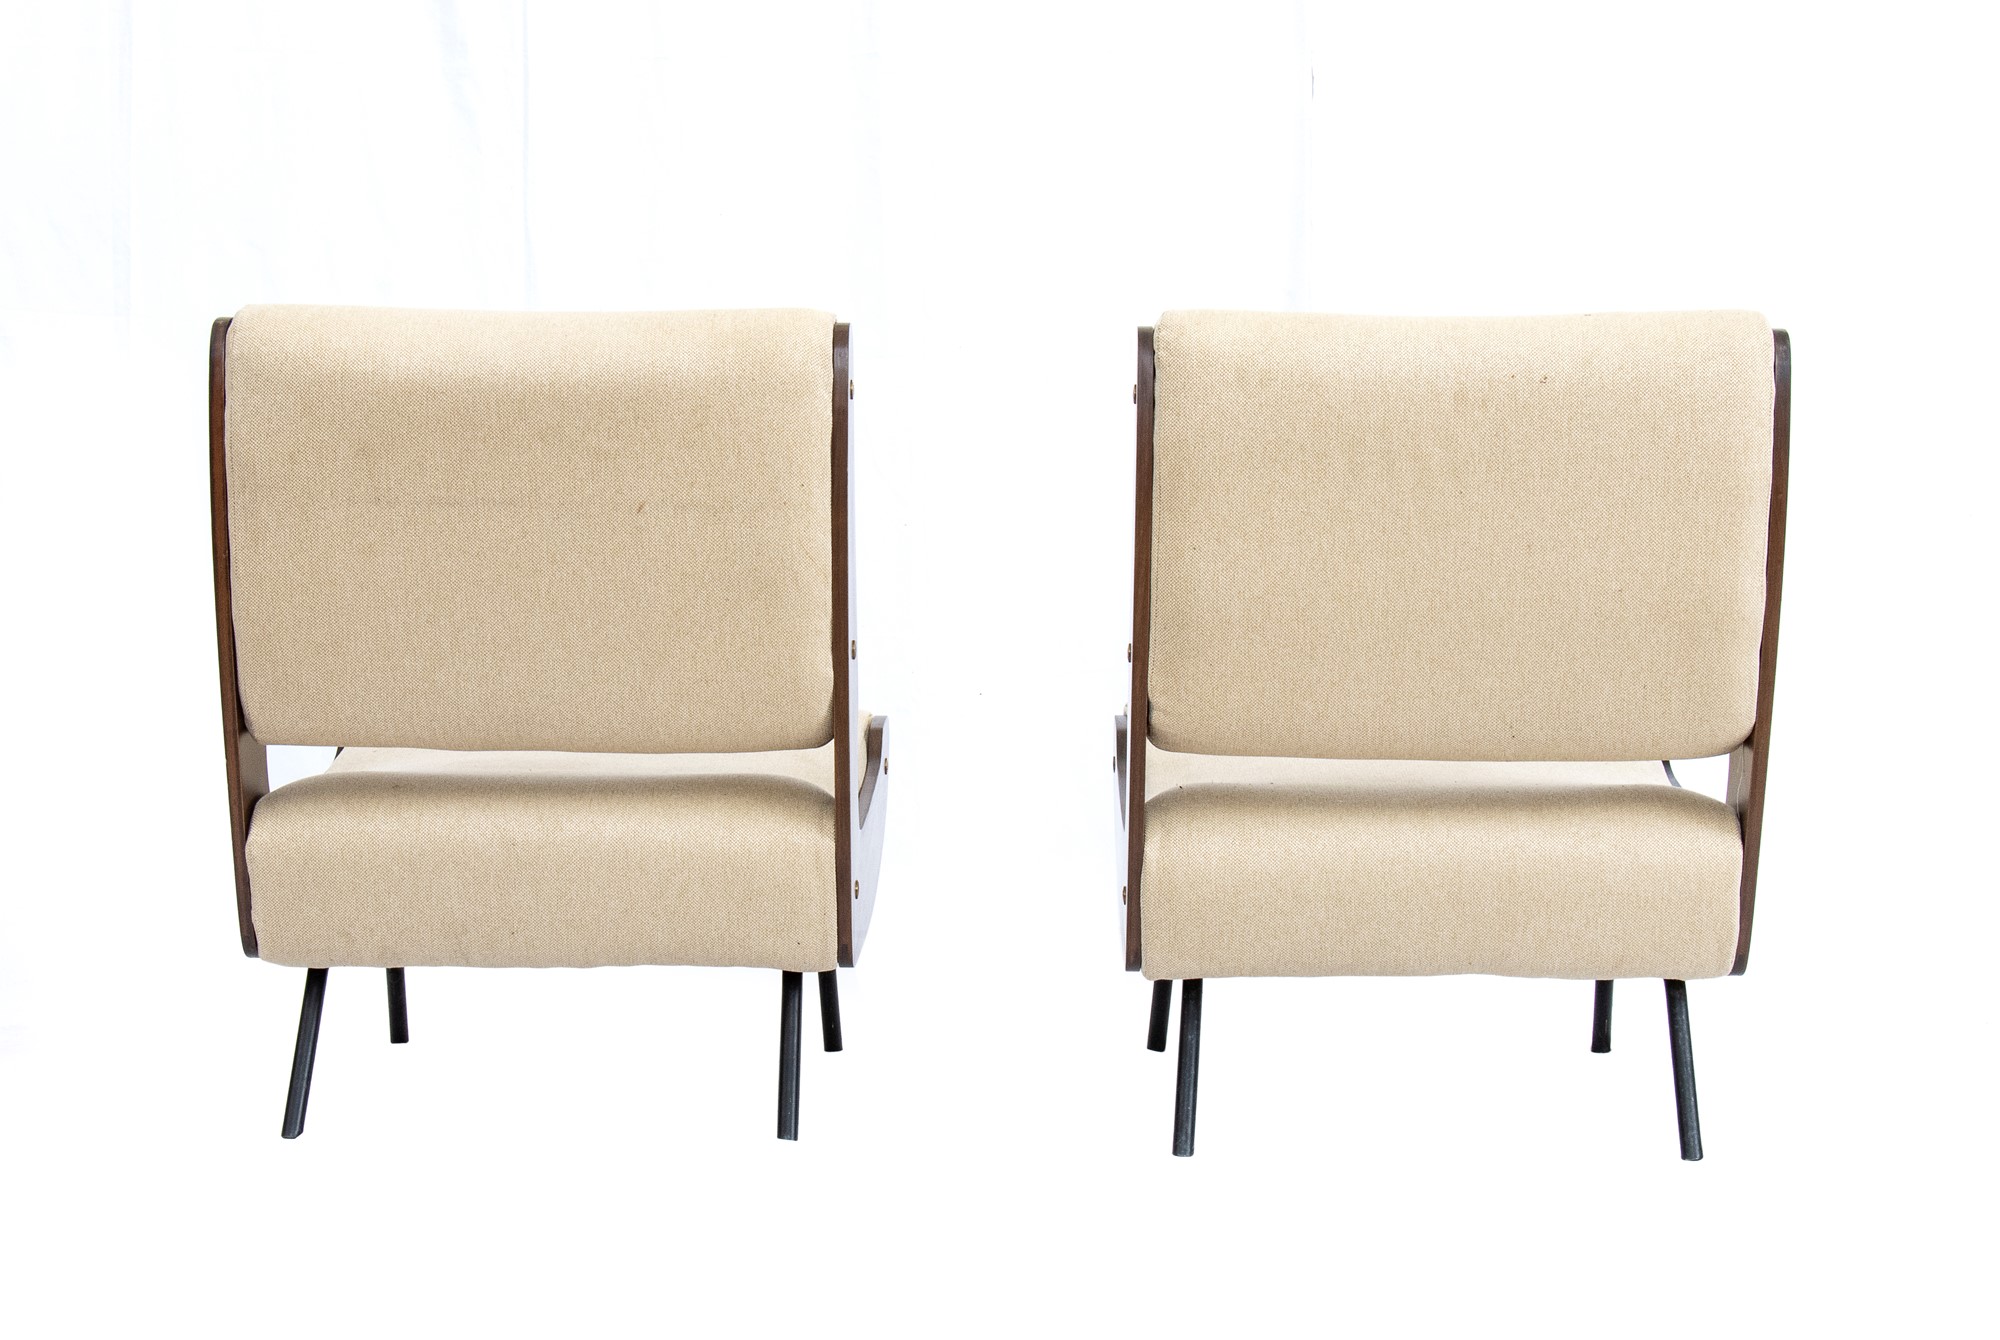 Gianfranco Frattini  Pair of armchairs mod. 863 with wooden and metal structure and brass details by - Image 19 of 19